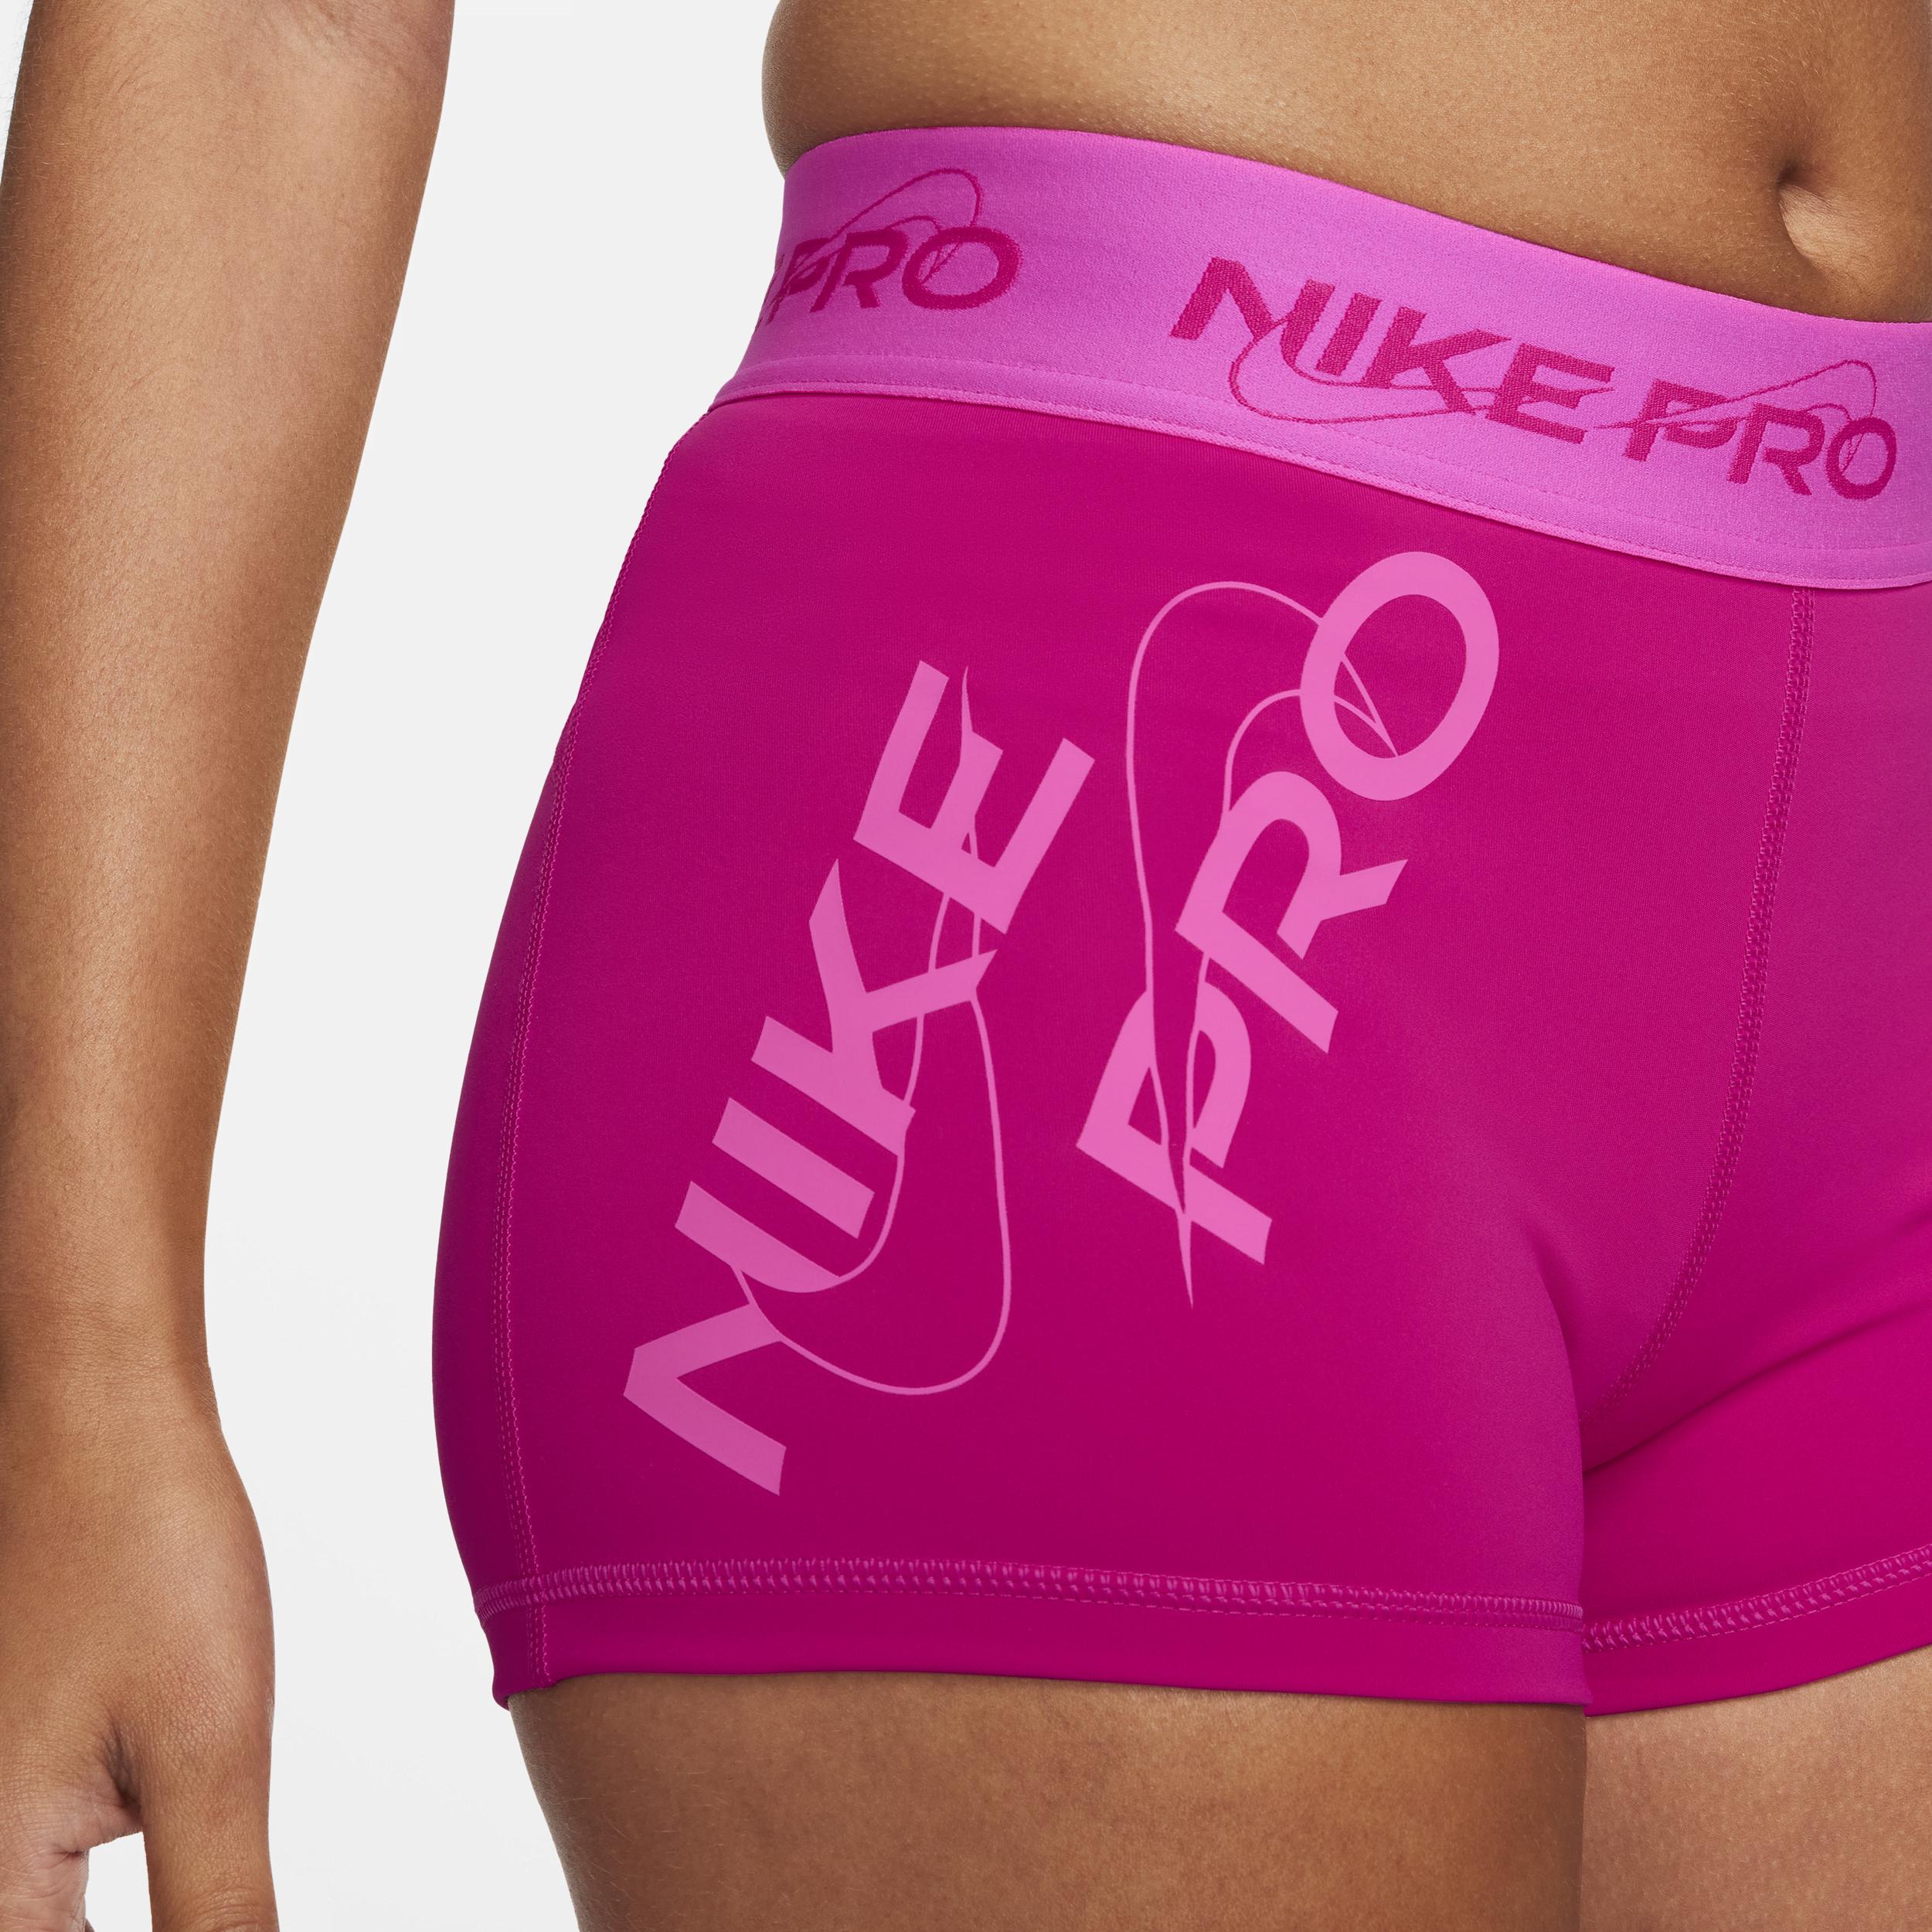 Nike Pro Mid-rise 3" Graphic Shorts in Pink | Lyst